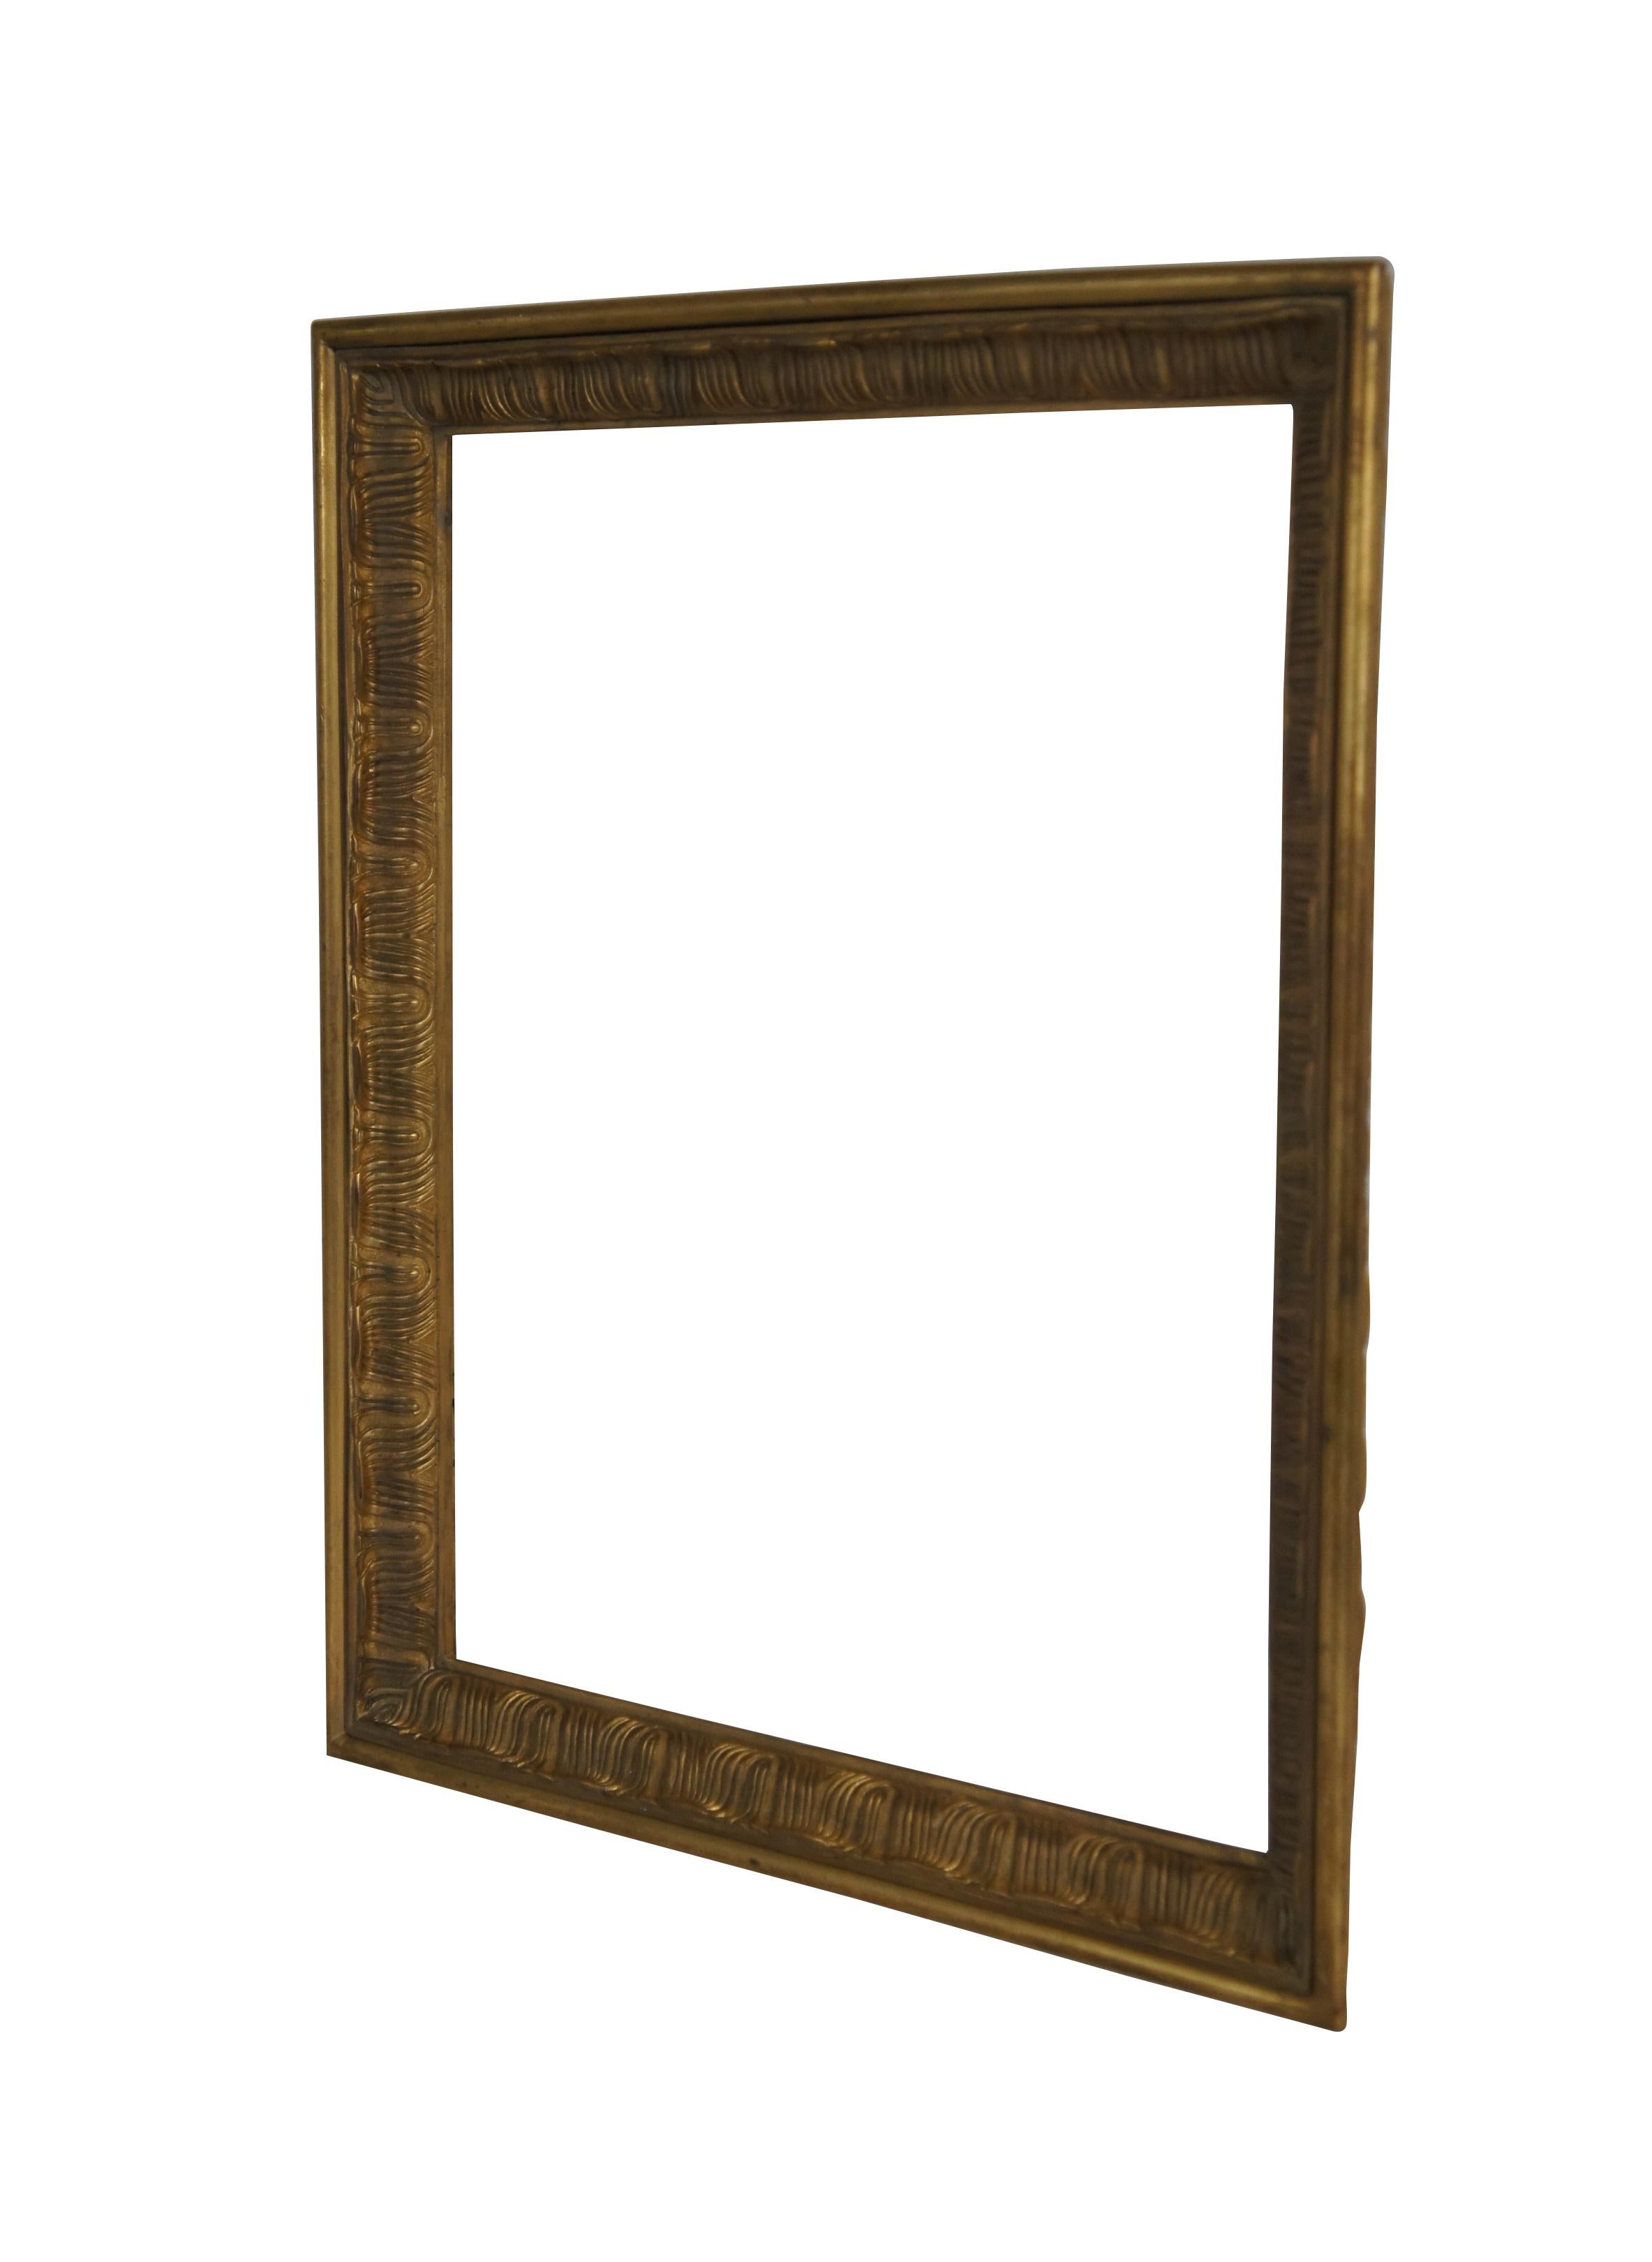 Antique heavy gilt bronze picture / mirror frame, cast to resemble a carved giltwood frame. Beveled edge decorated with an engraved scalloped ripple design; visible on both sides of the frame.

Dimensions:
12.75